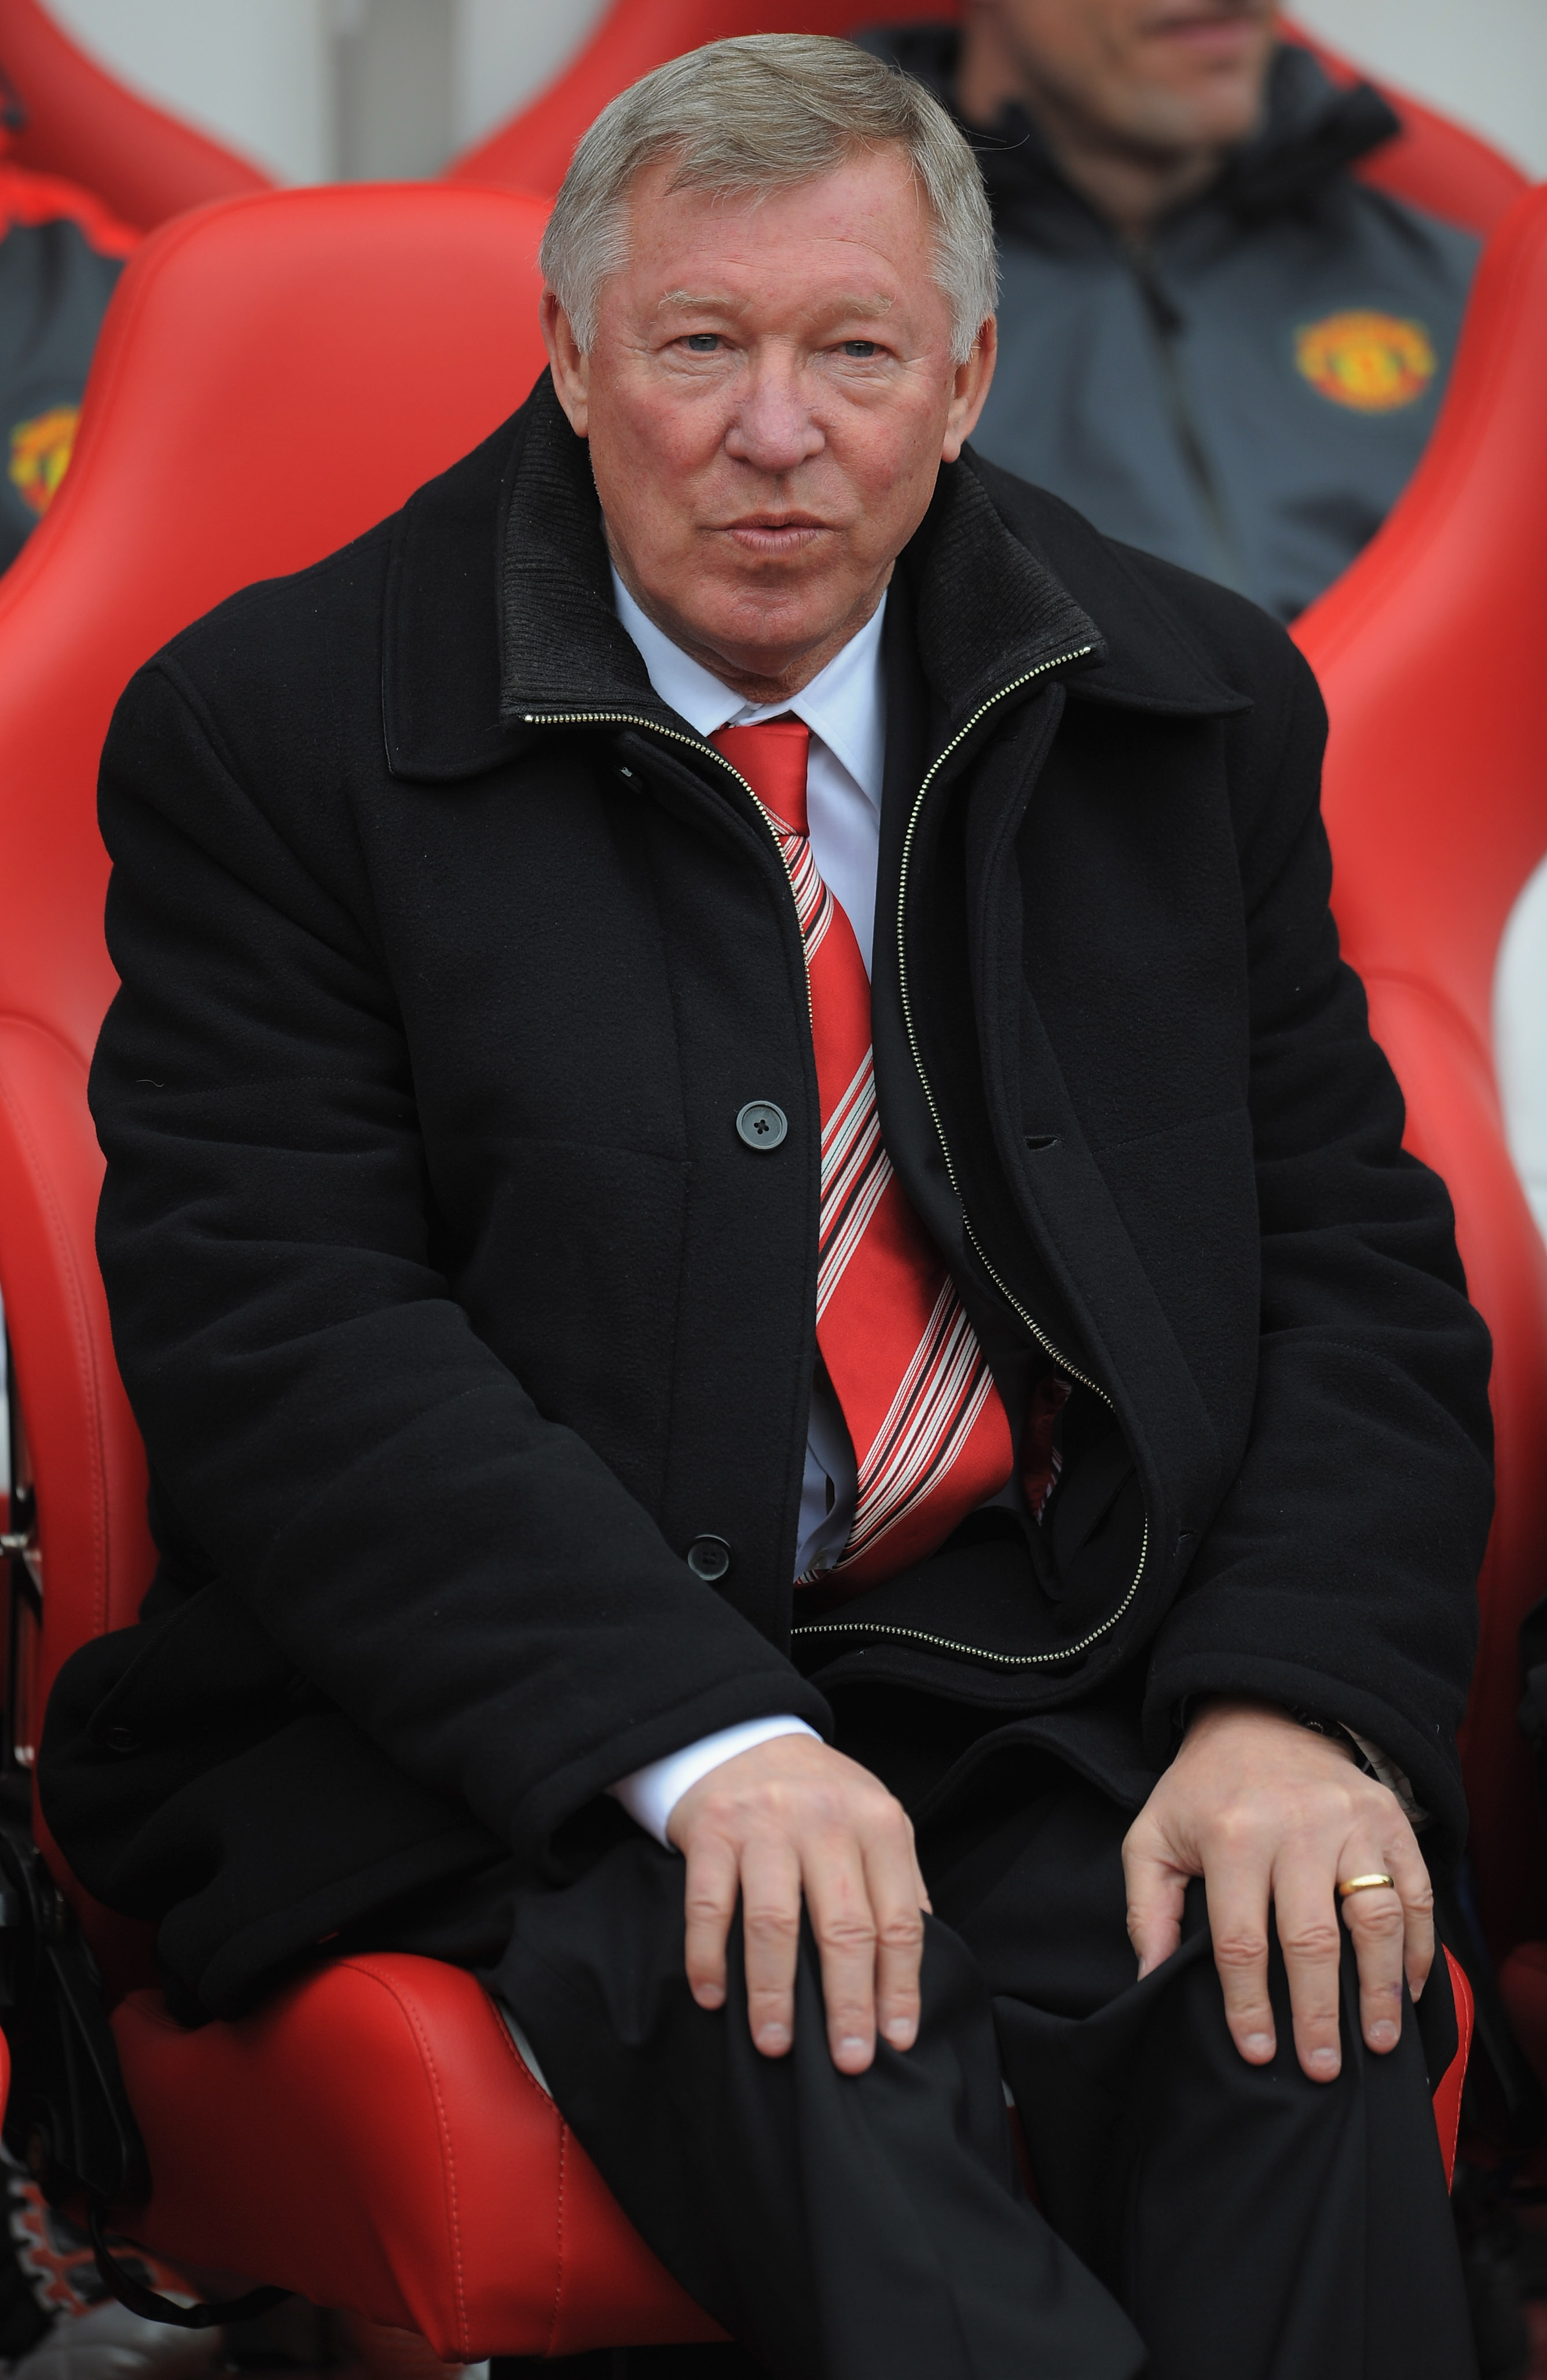 SUNDERLAND, ENGLAND - OCTOBER 02: Manchester United manager Sir Alex Ferguson looks on before the Barclays Premier League match between Sunderland and Manchester United at the Stadium of Light on October 2, 2010 in Sunderland, England.  (Photo by Michael 